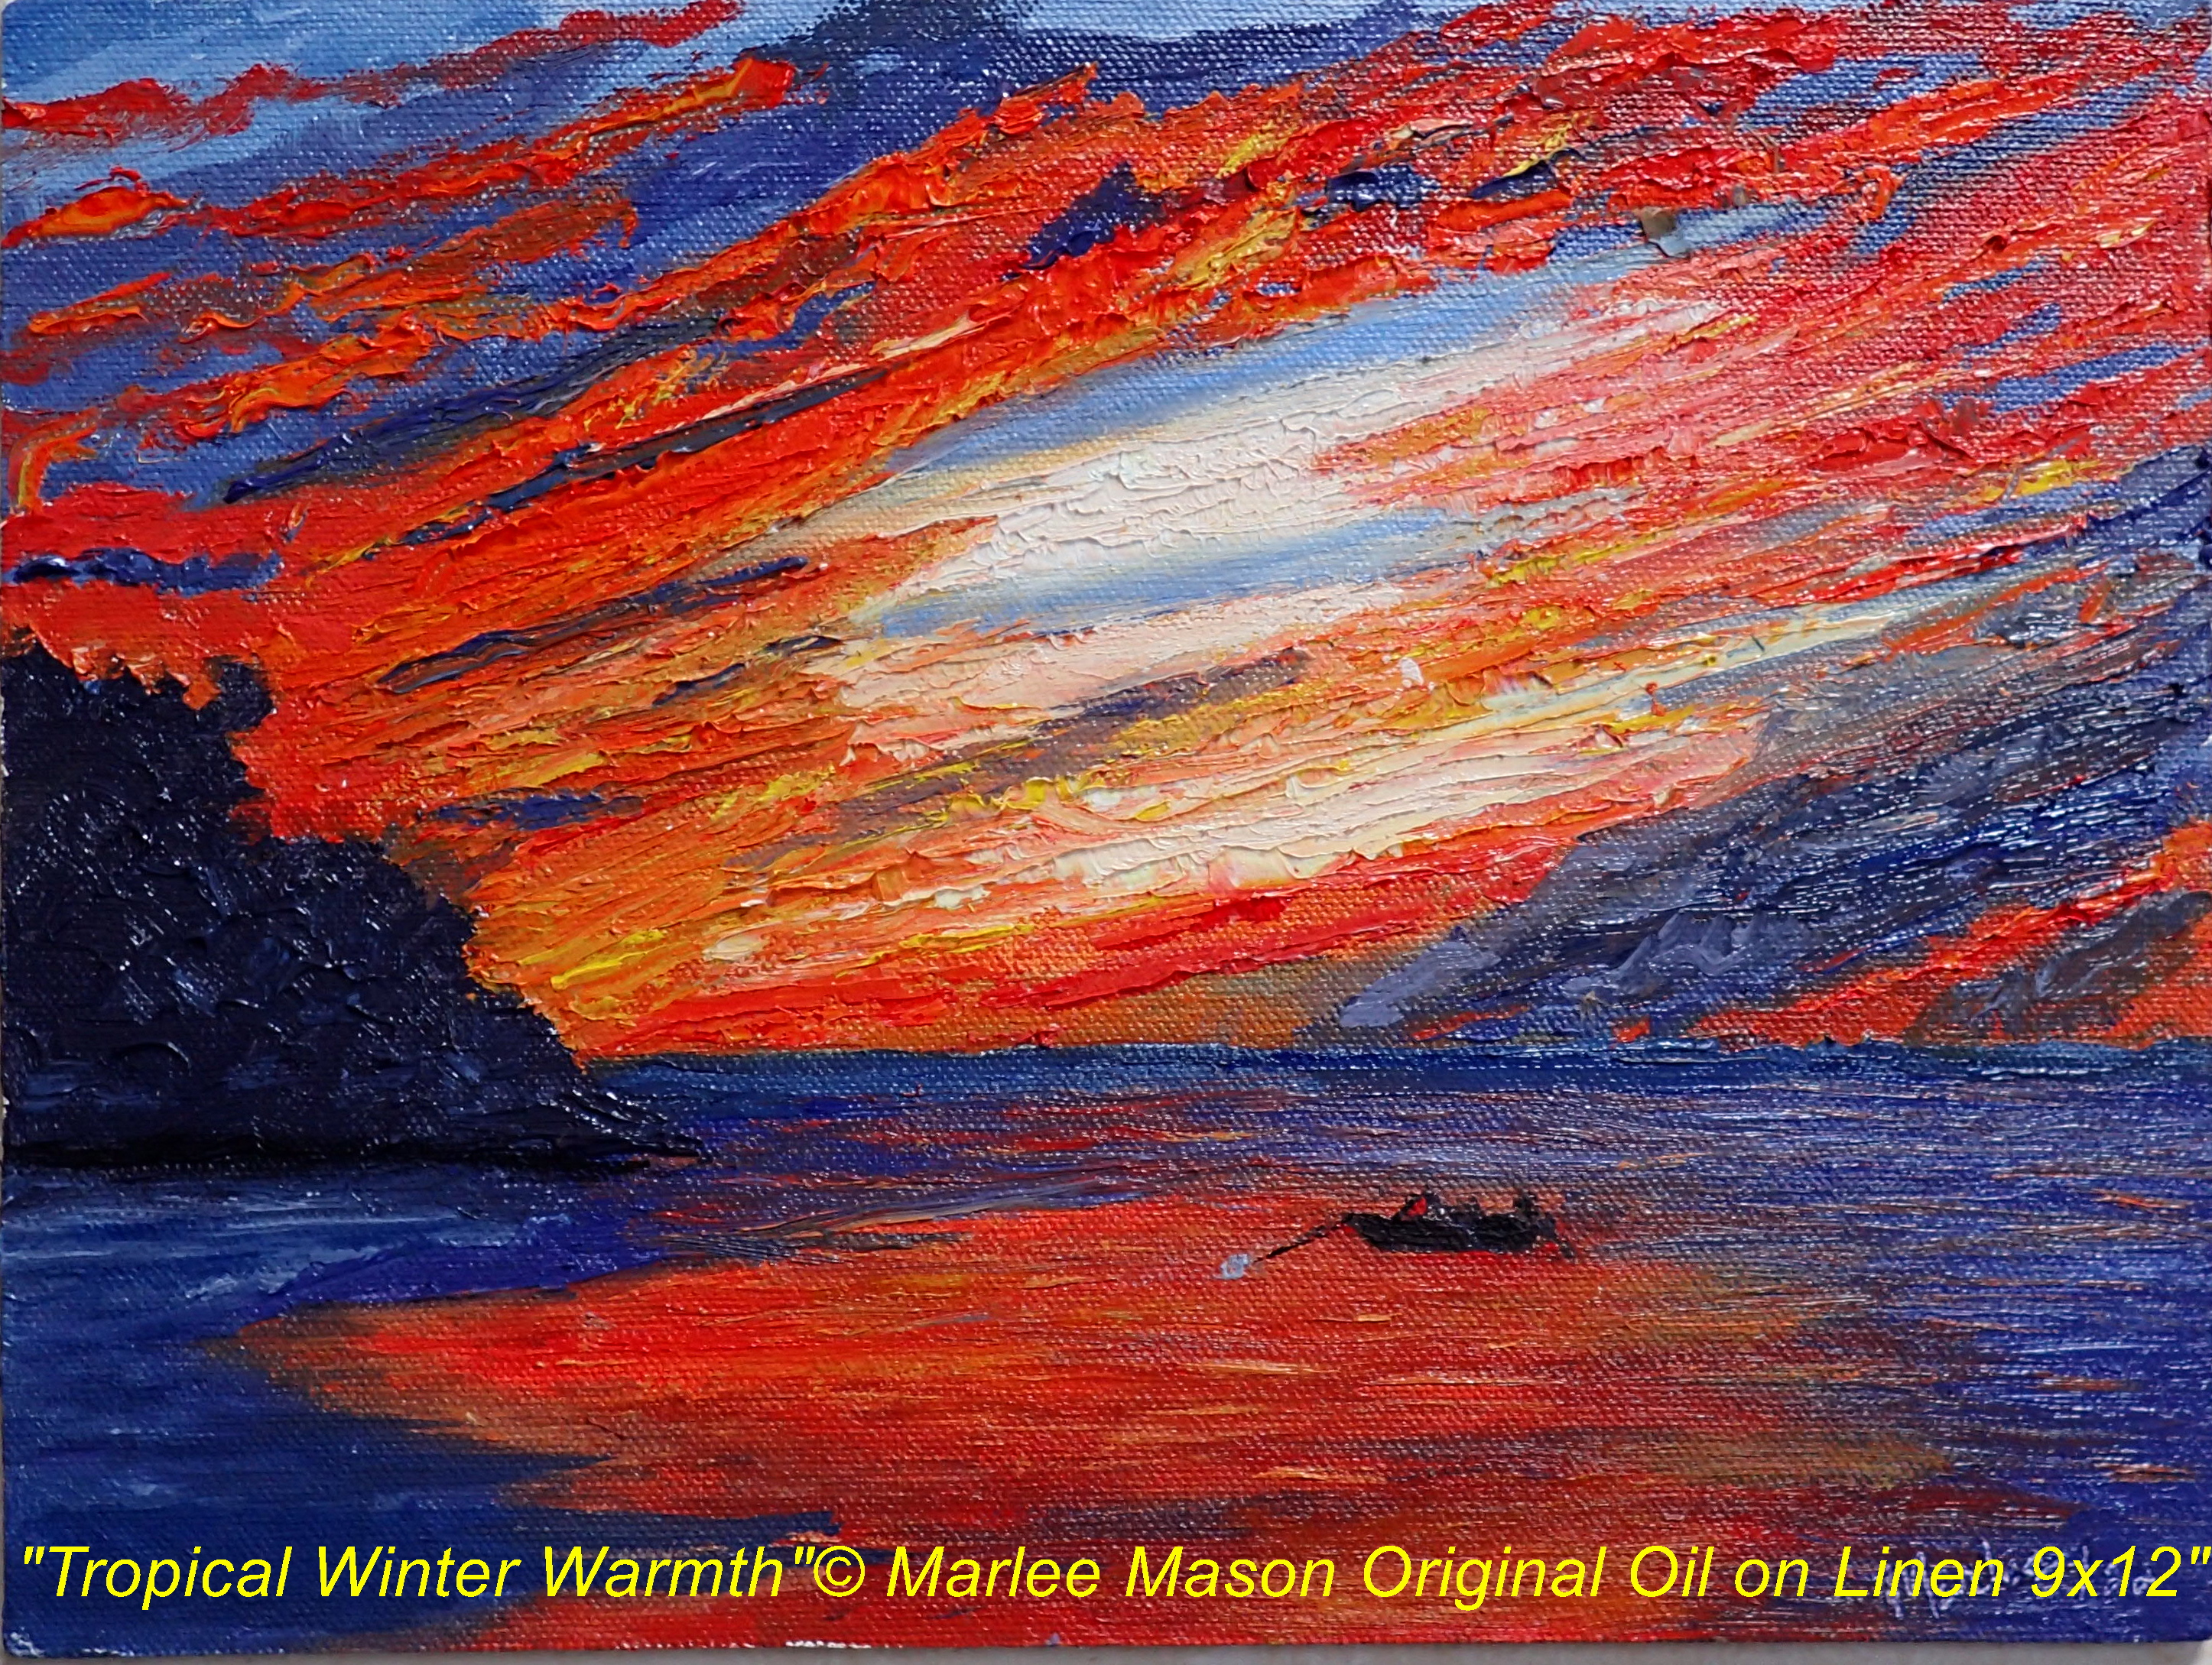 9x12 Original oil painting on canvas.   The season has multi coloured tropical sunrise and sunset magnificence seen over the water.  This is an early winter sunset from the western beach shore of my p